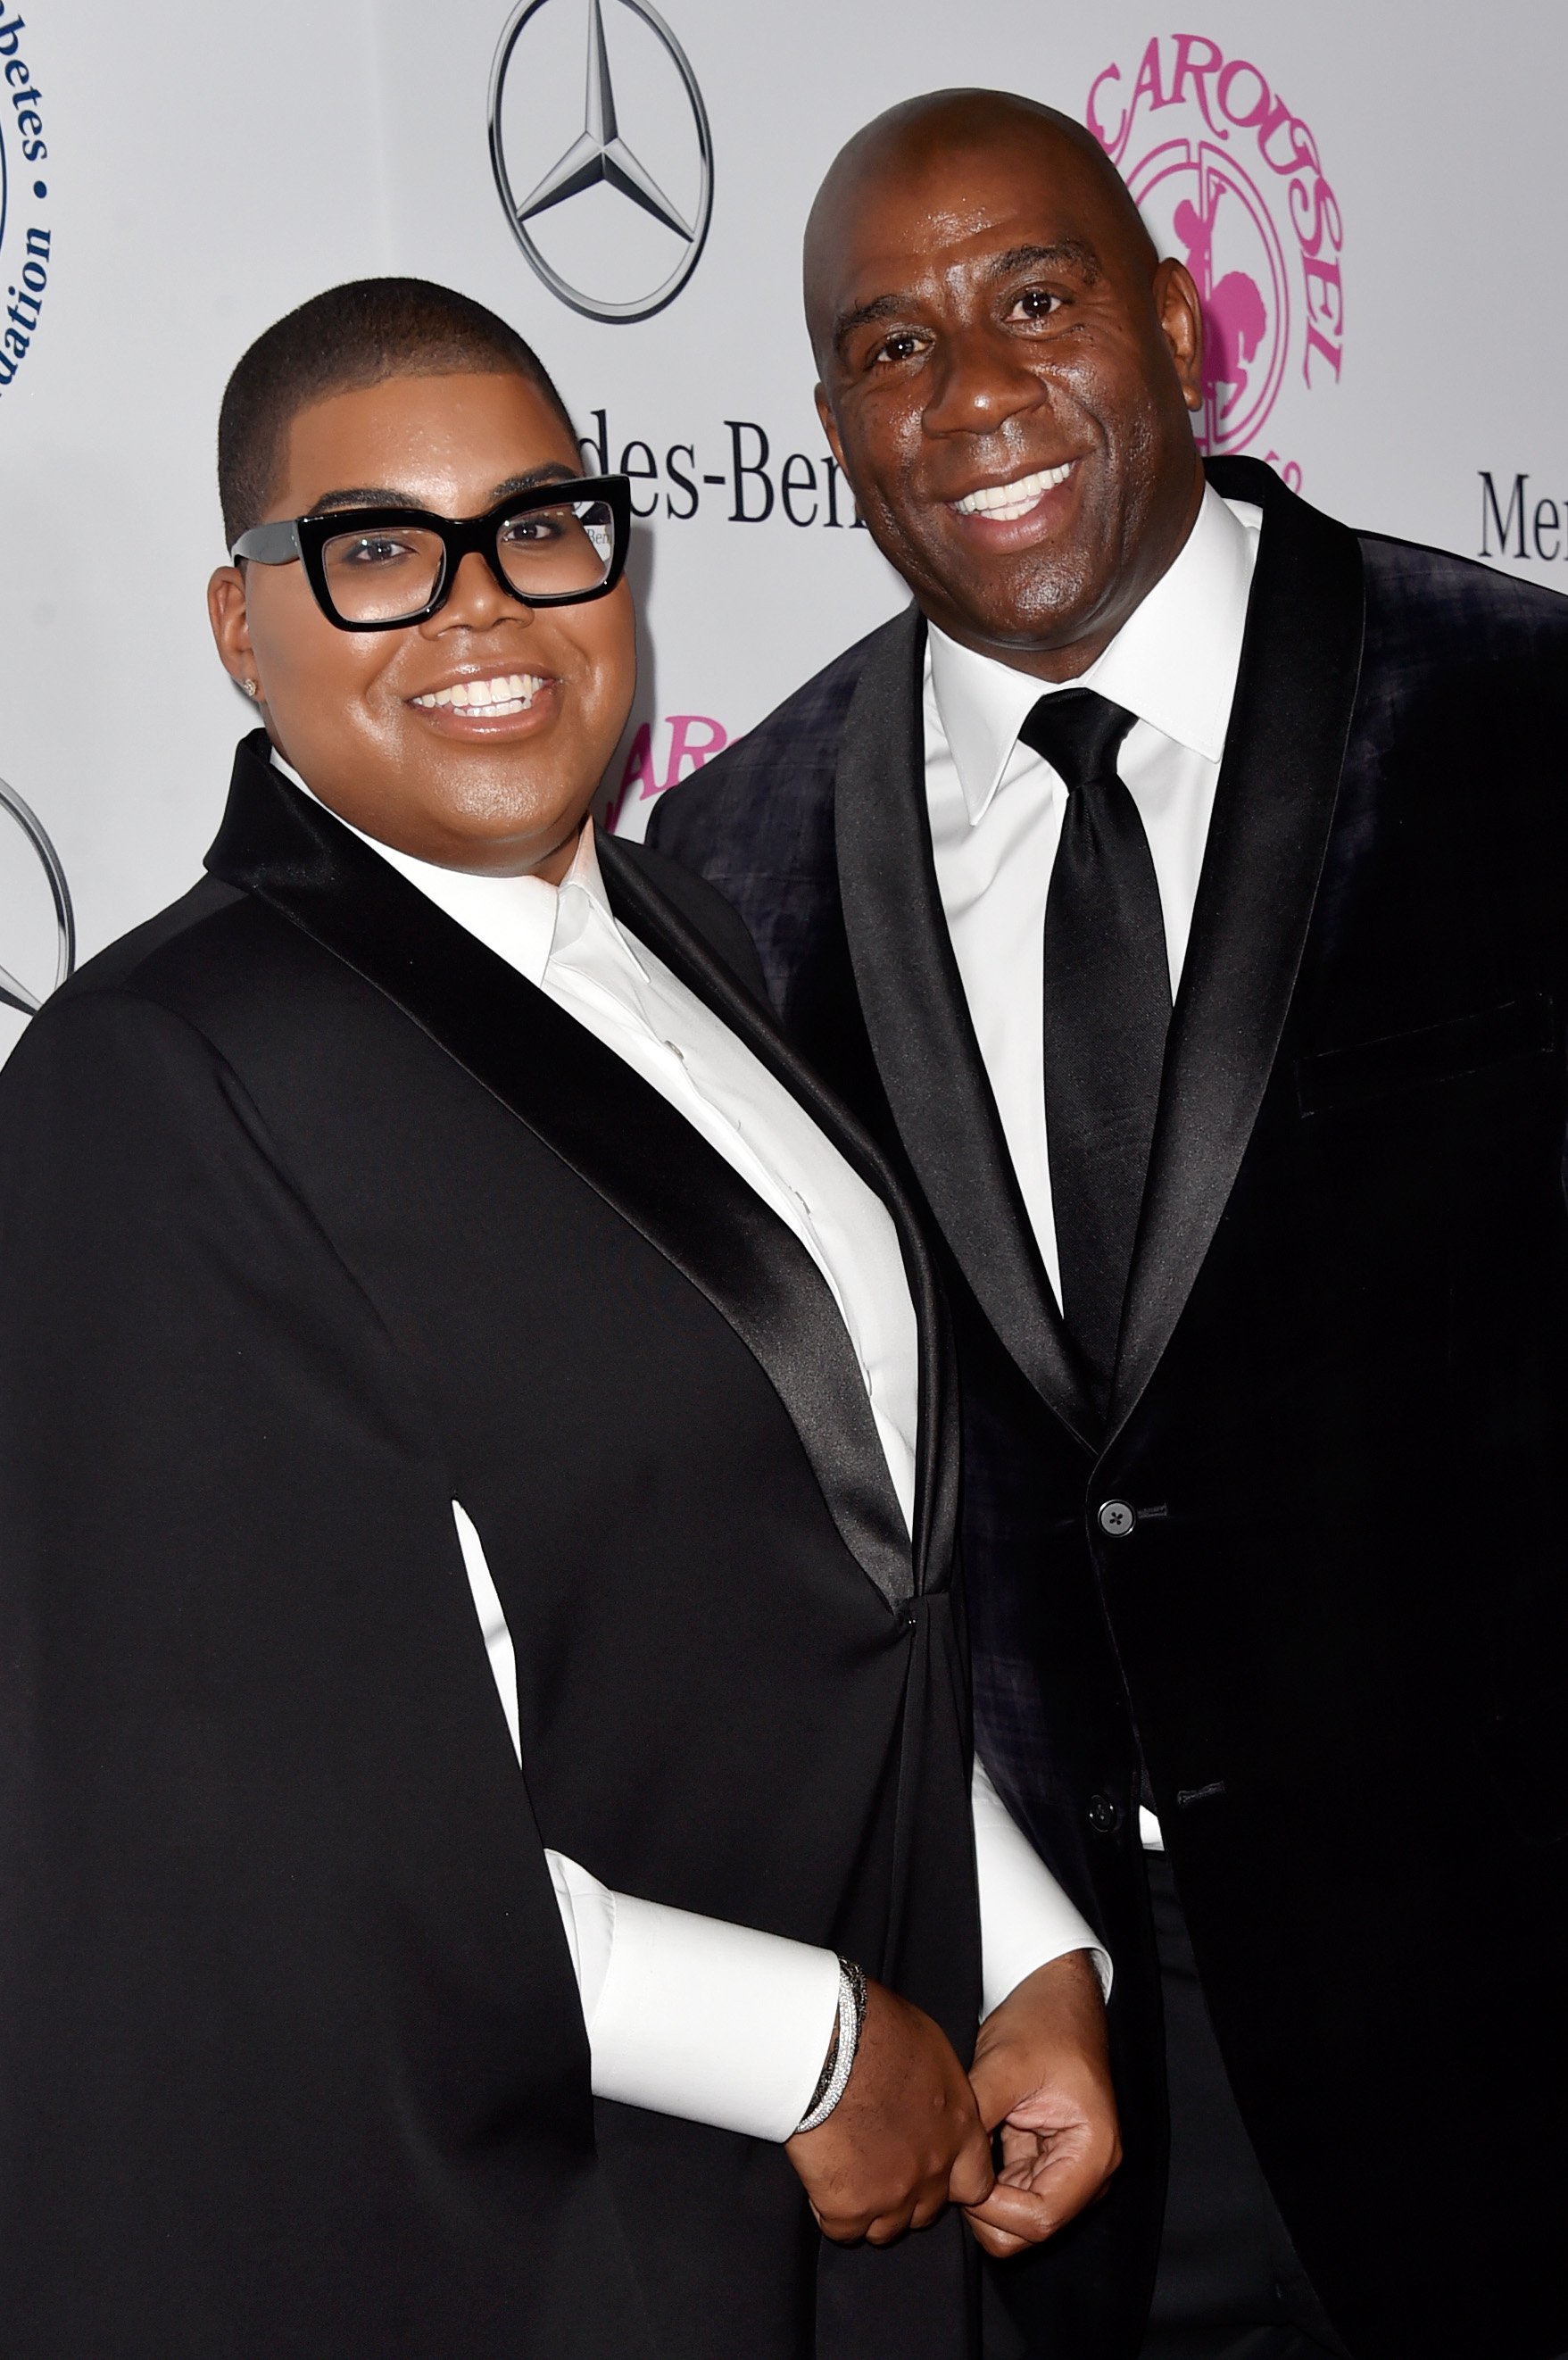  EJ Johnso and Magic Johnson at the 2014 Carousel of Hope Ball on October 11, 2014 in Beverly Hills, California | Photo: Getty Images